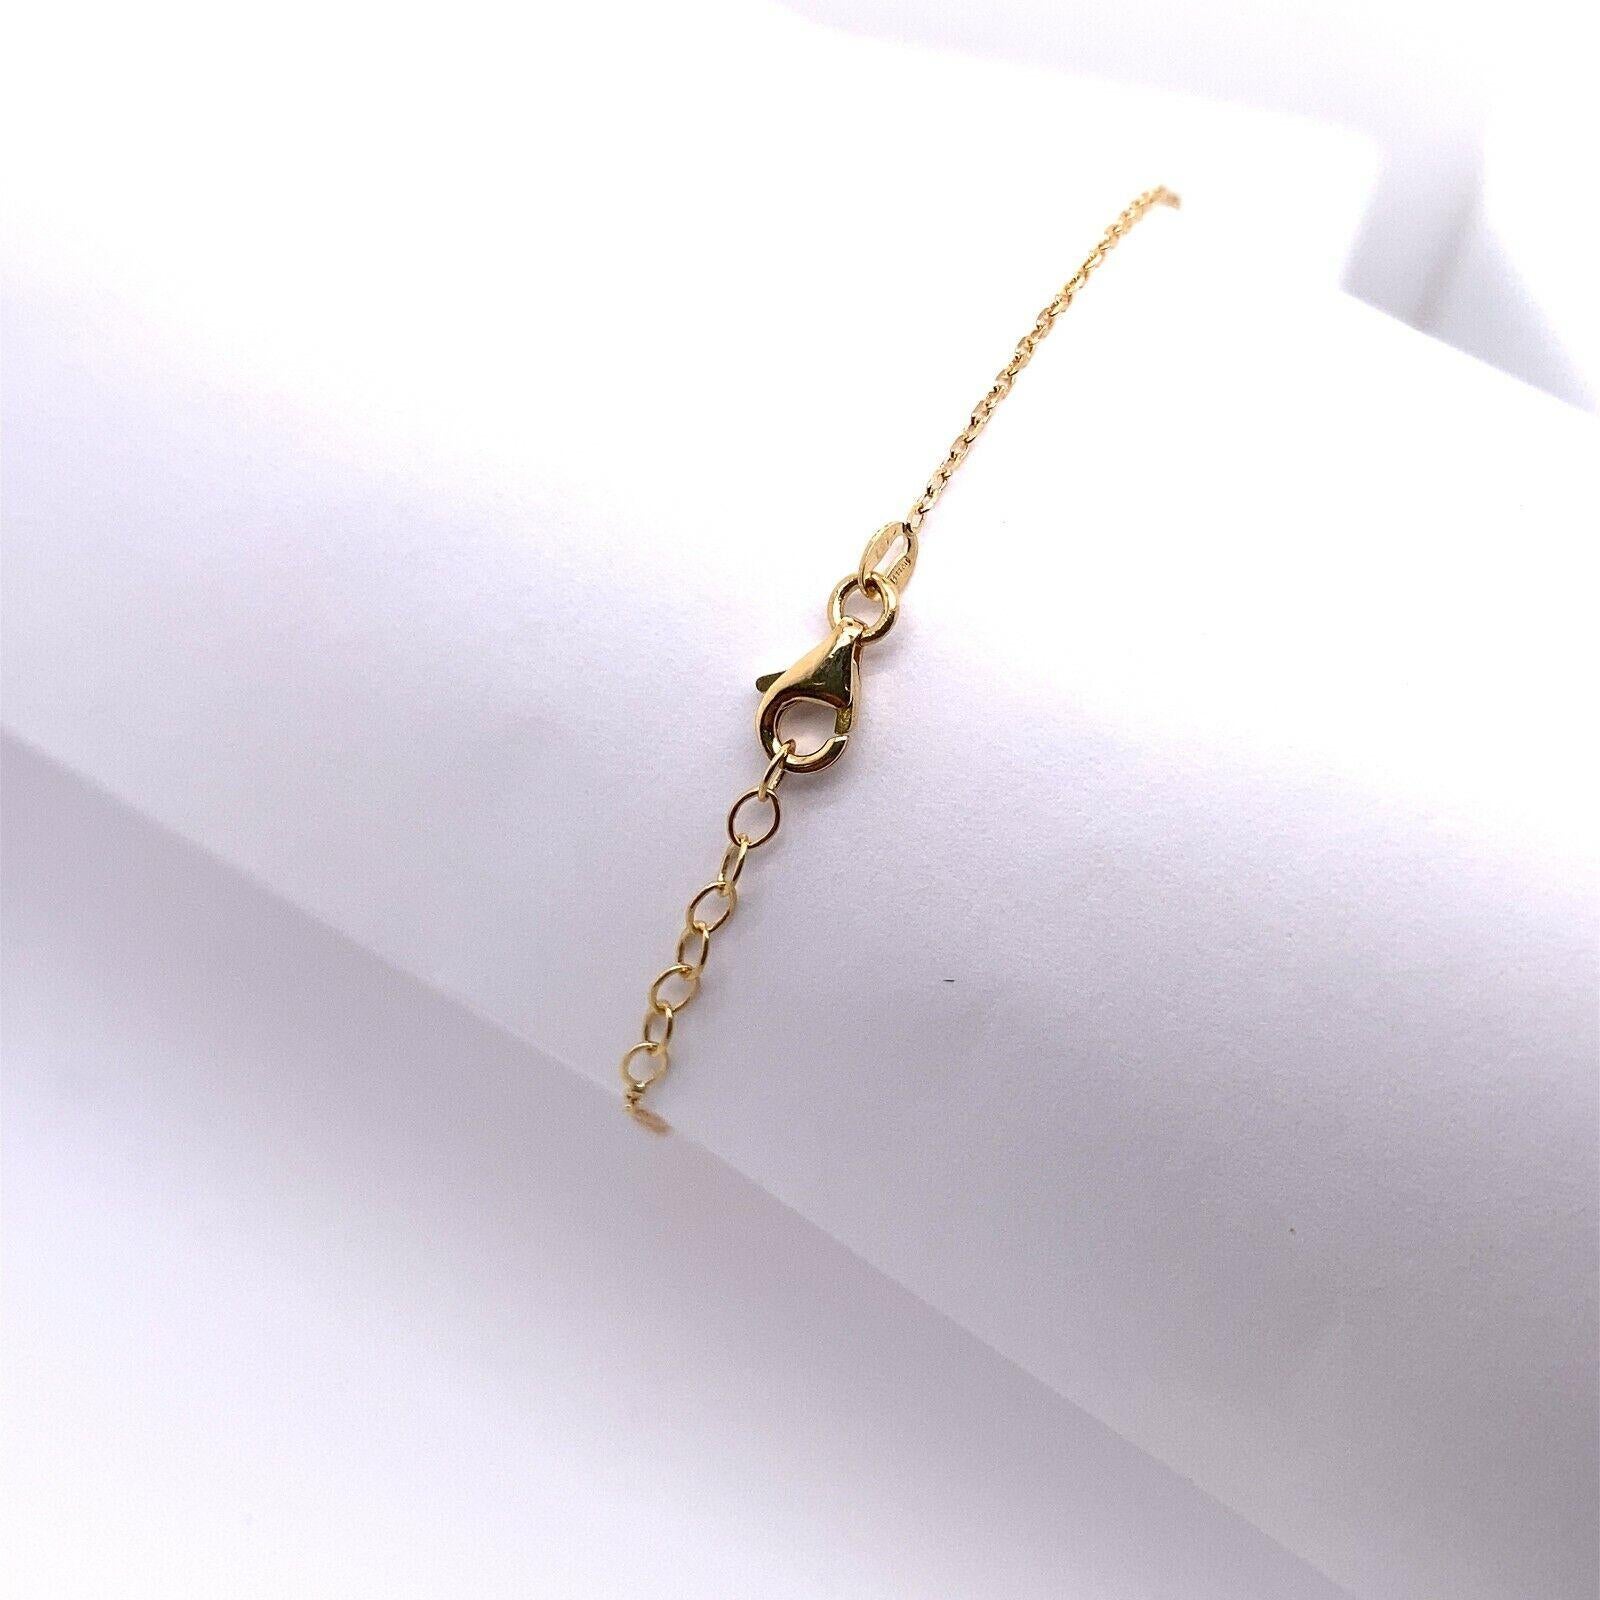 New Love Bracelet on Adjustable Chain in 18ct Yellow Gold In New Condition For Sale In London, GB